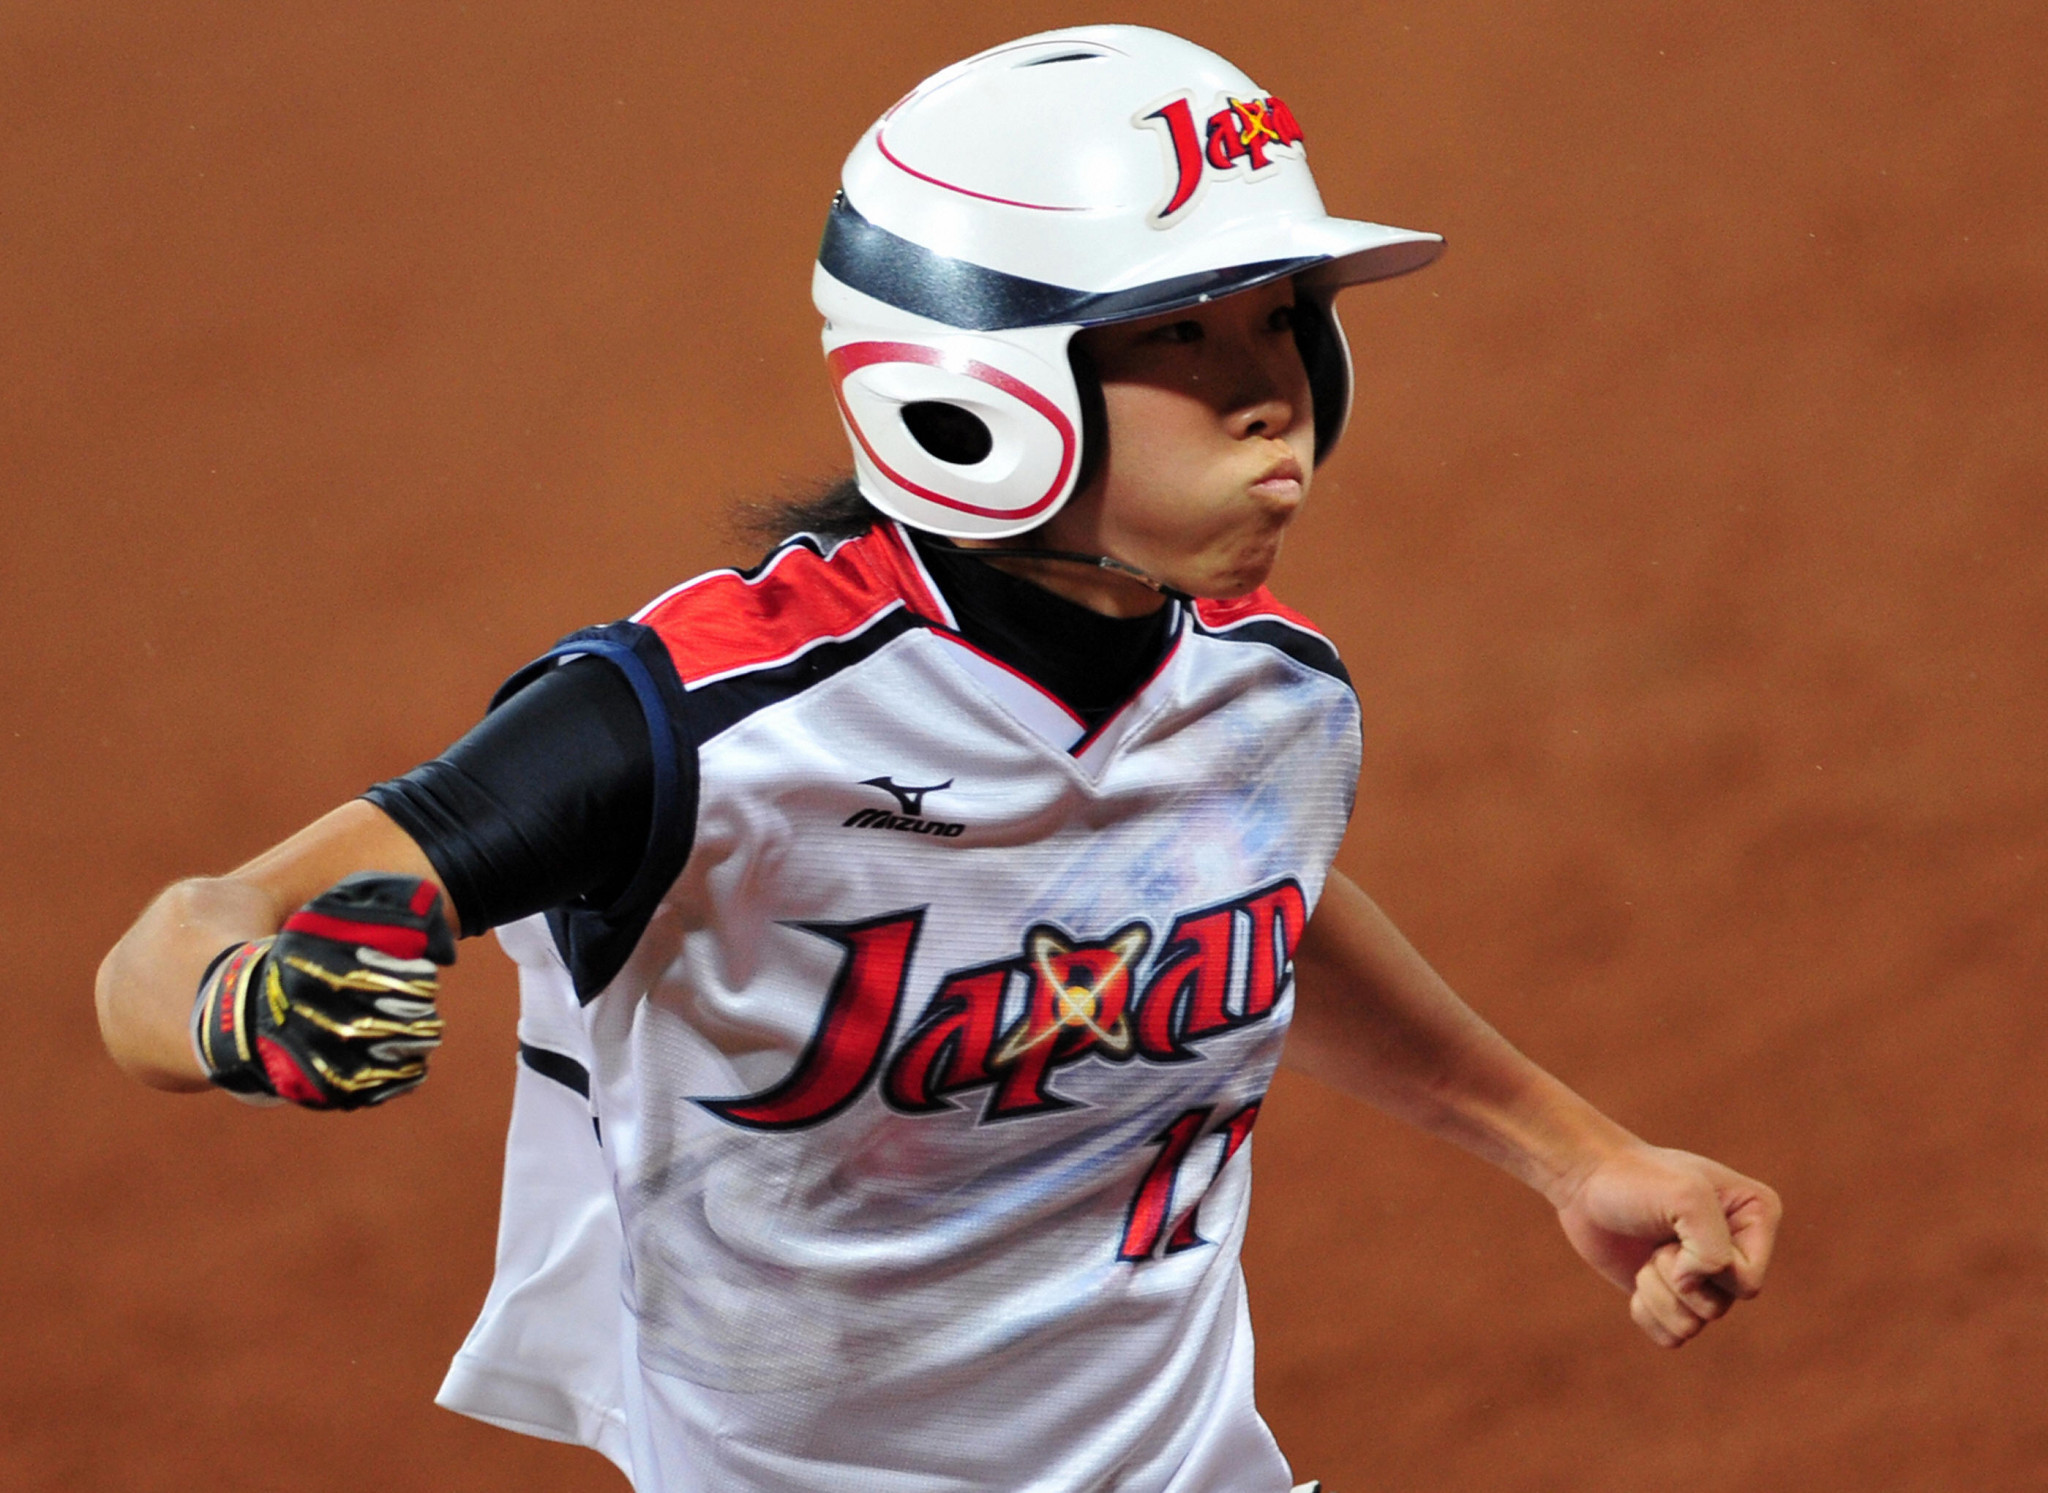 Eri Yamada earned Olympic softball gold with Japan at Beijing 2008 ©Getty Images